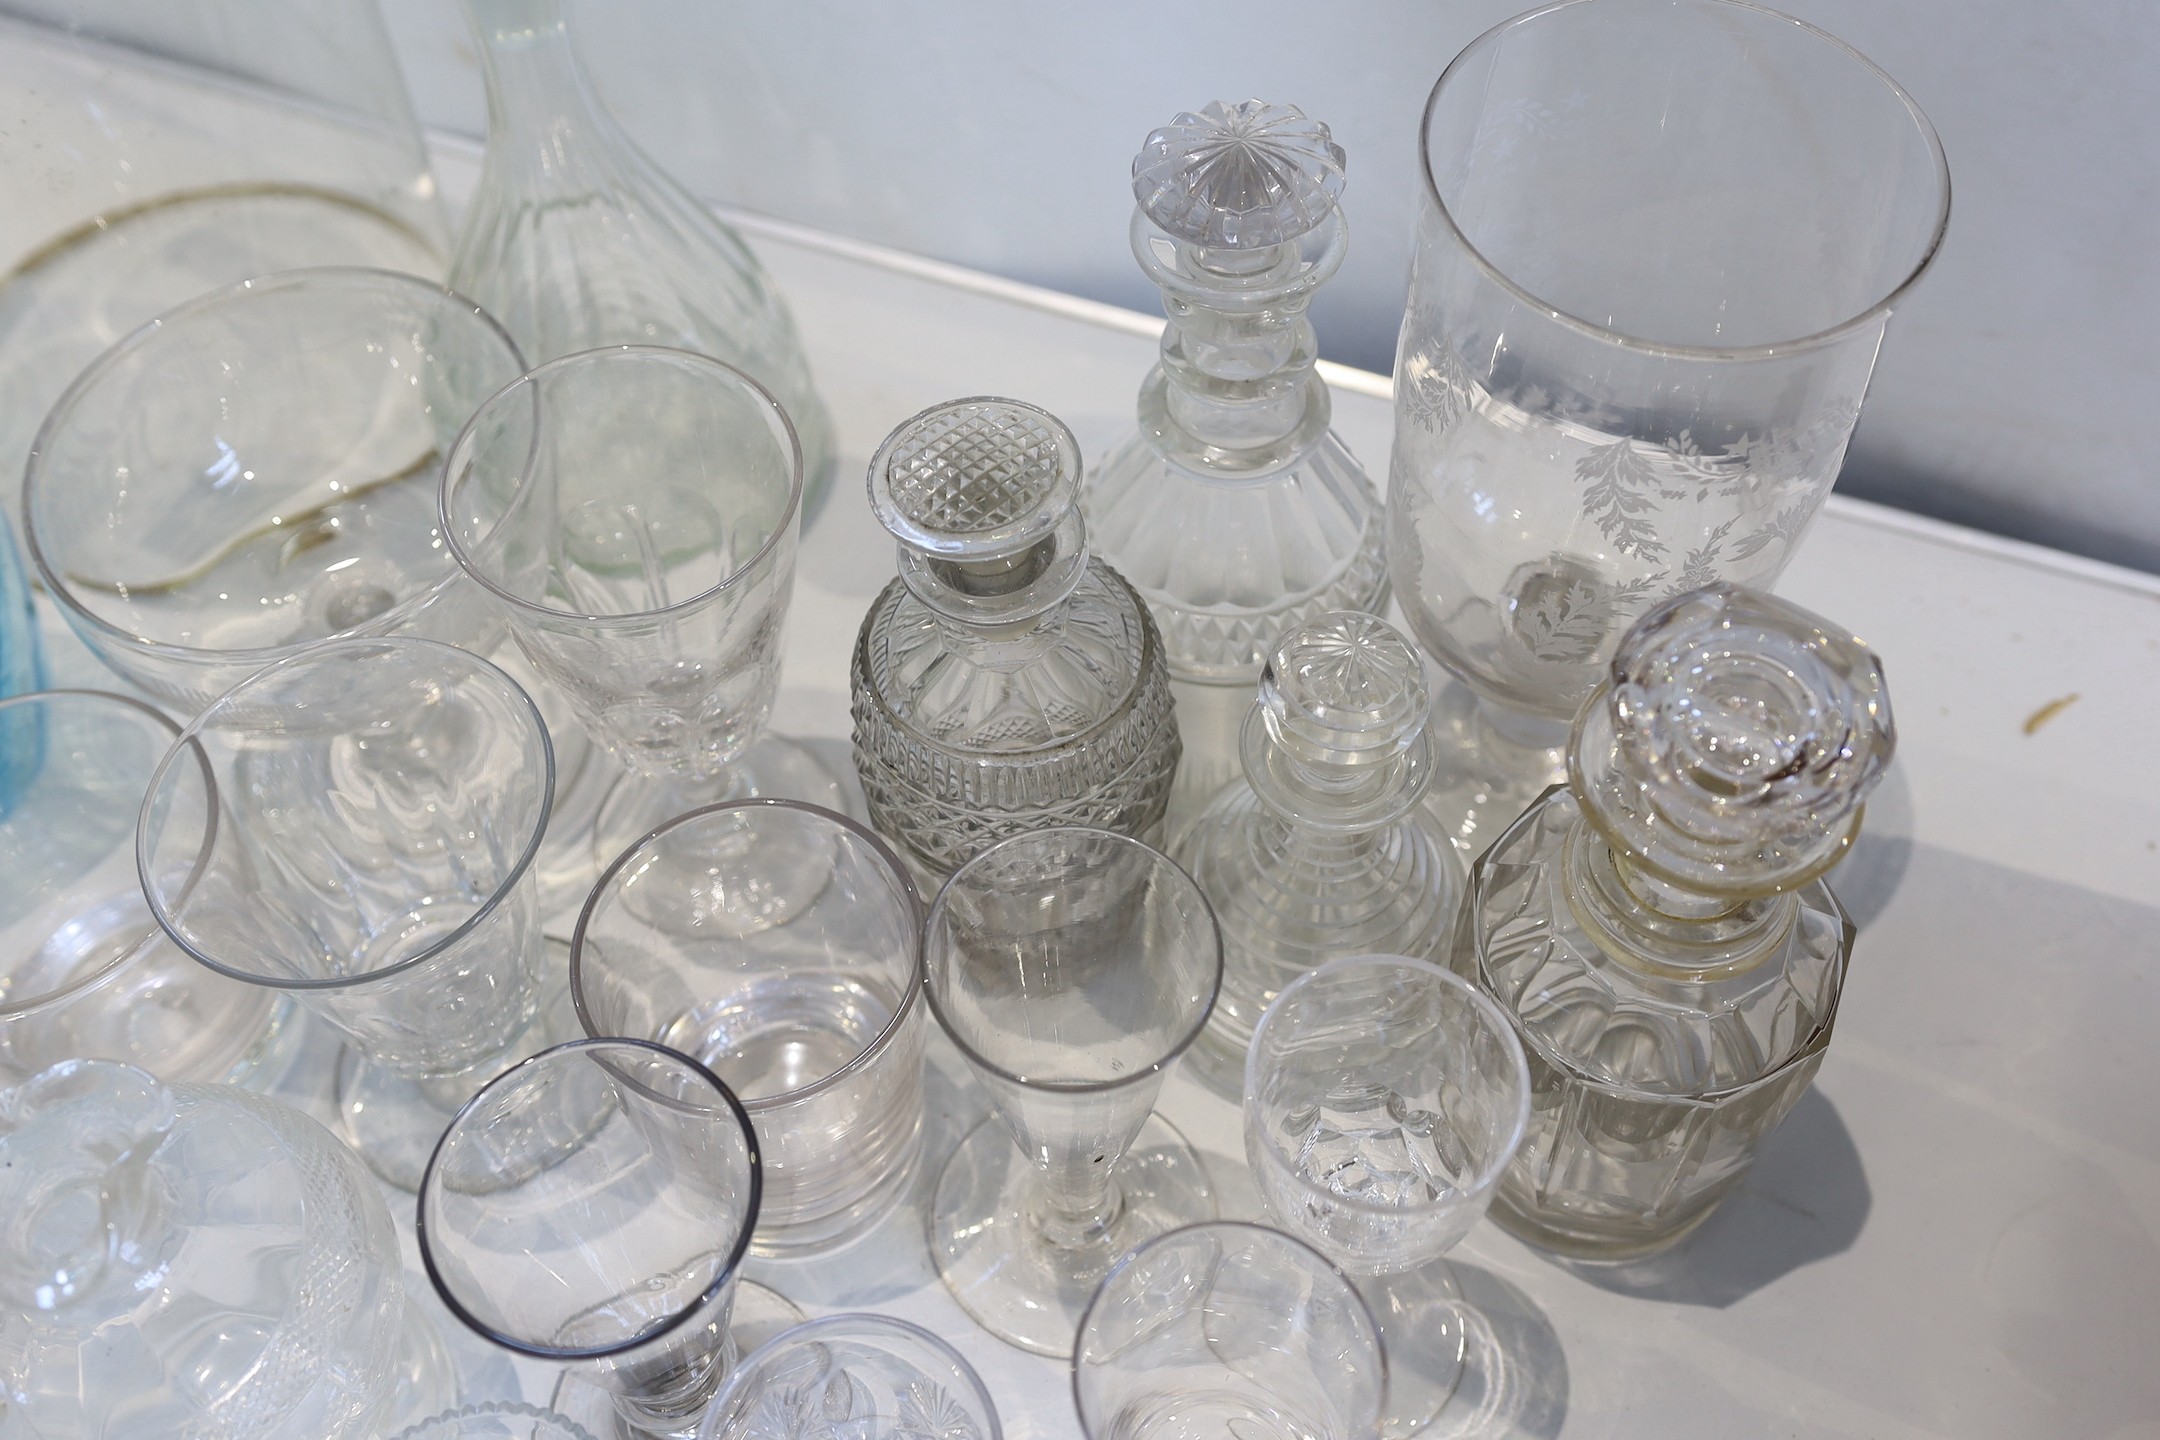 A collection of 19th century and later decanters, drinking glasses, oil bottles etc.